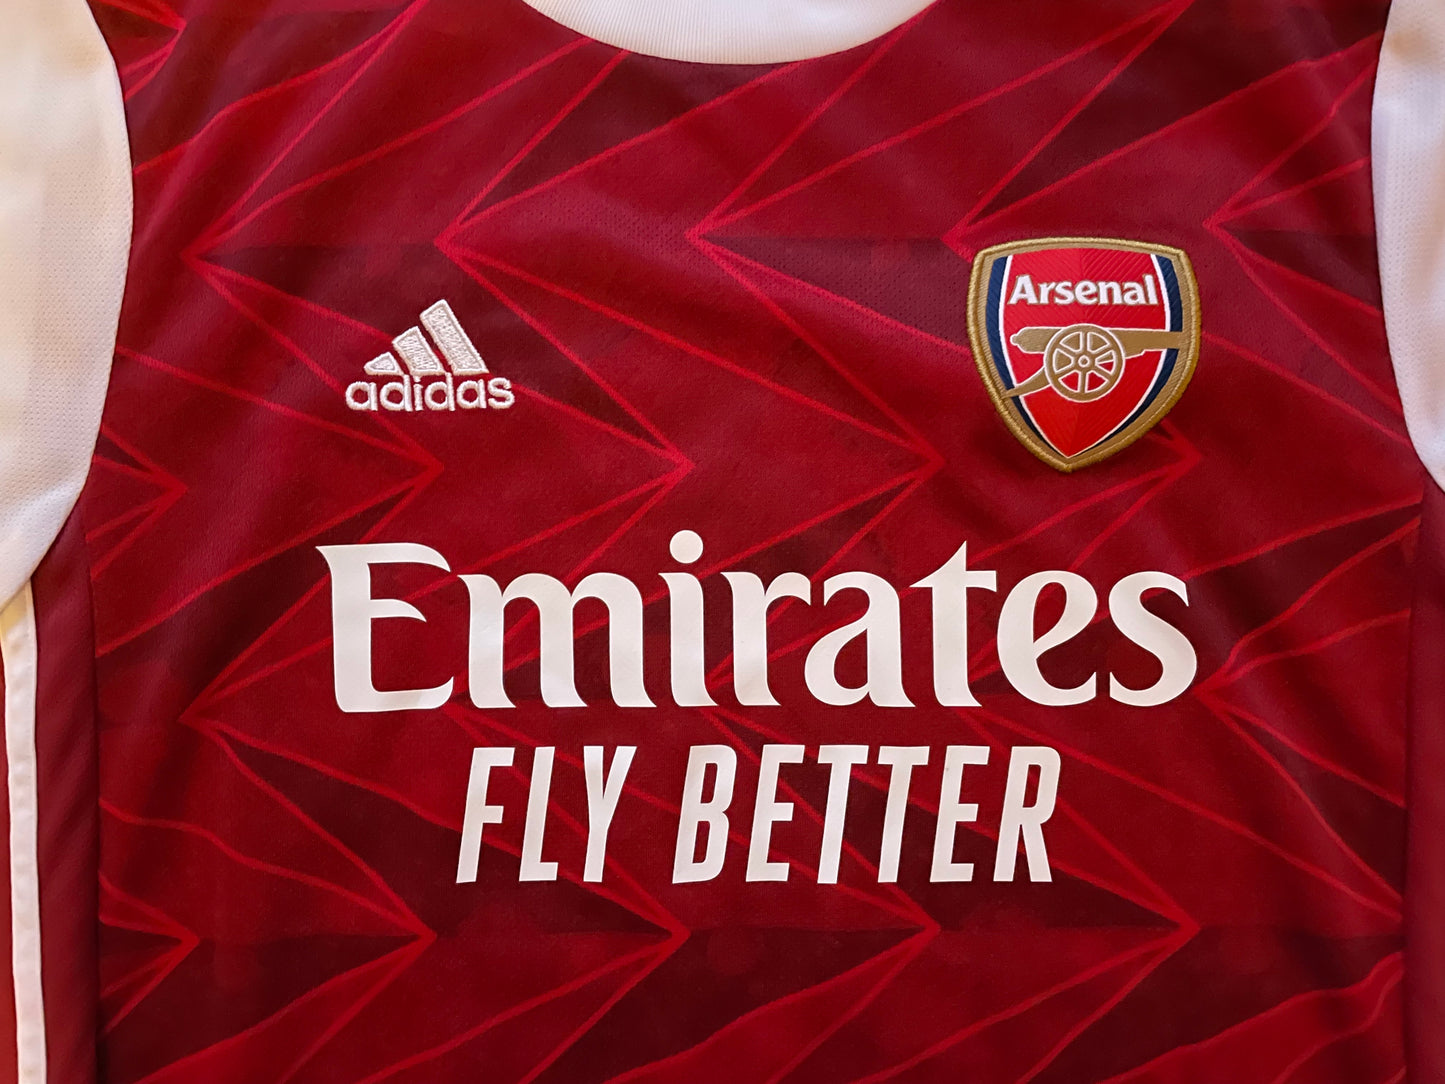 Arsenal 2020 Home Shirt (excellent) Adults XXS/Youths see below